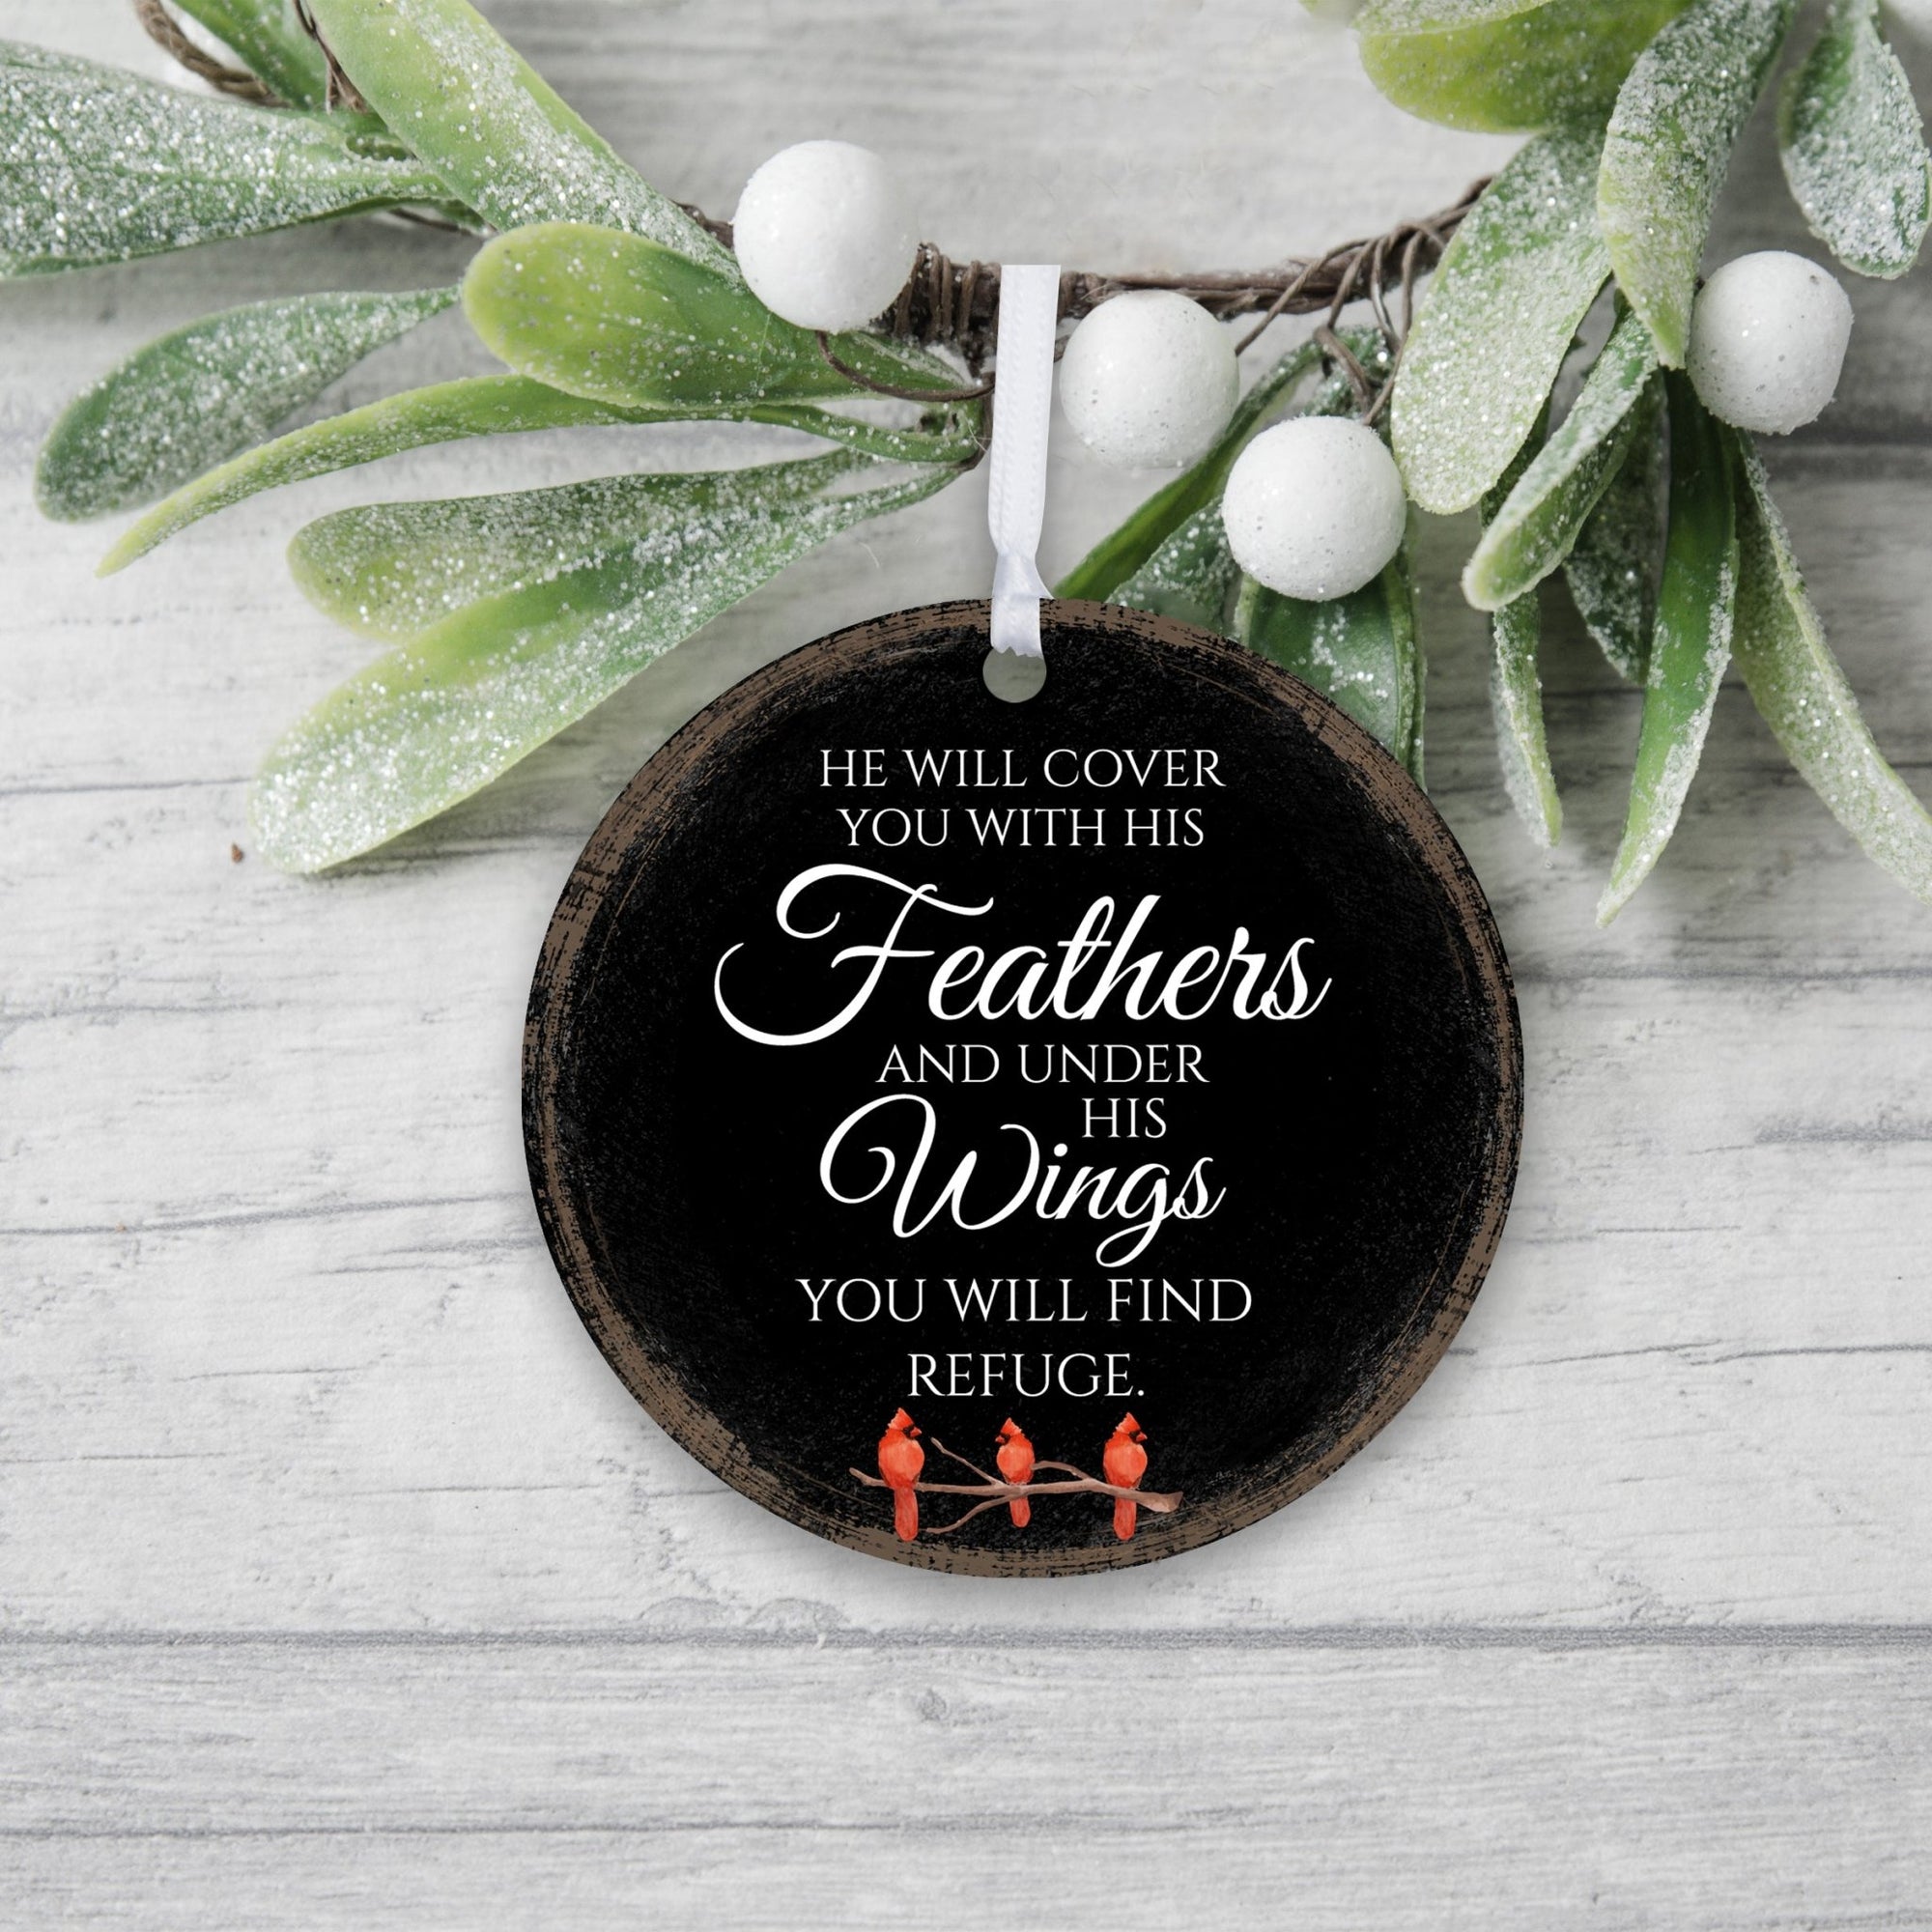 Vintage-Inspired Cardinal Ornament With Everyday Verses Gift Ideas - He Will Cover - LifeSong Milestones